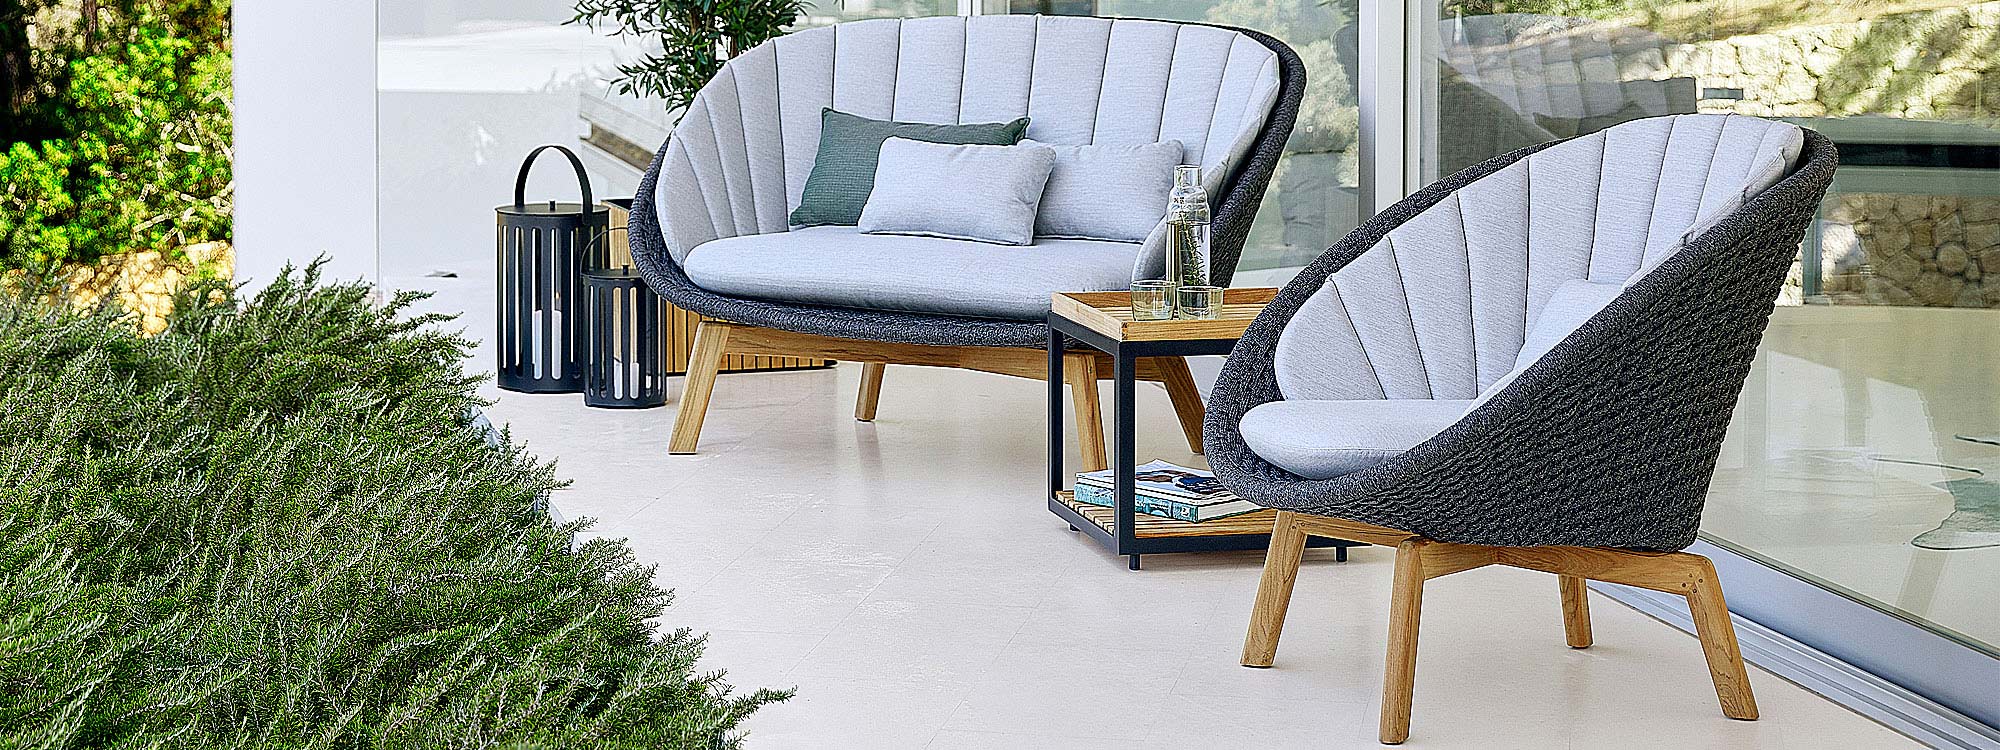 Image of Cane-line Peacock 2 seat sofa and lounge chair in dark-grey Soft Rope with Light-grey cushions